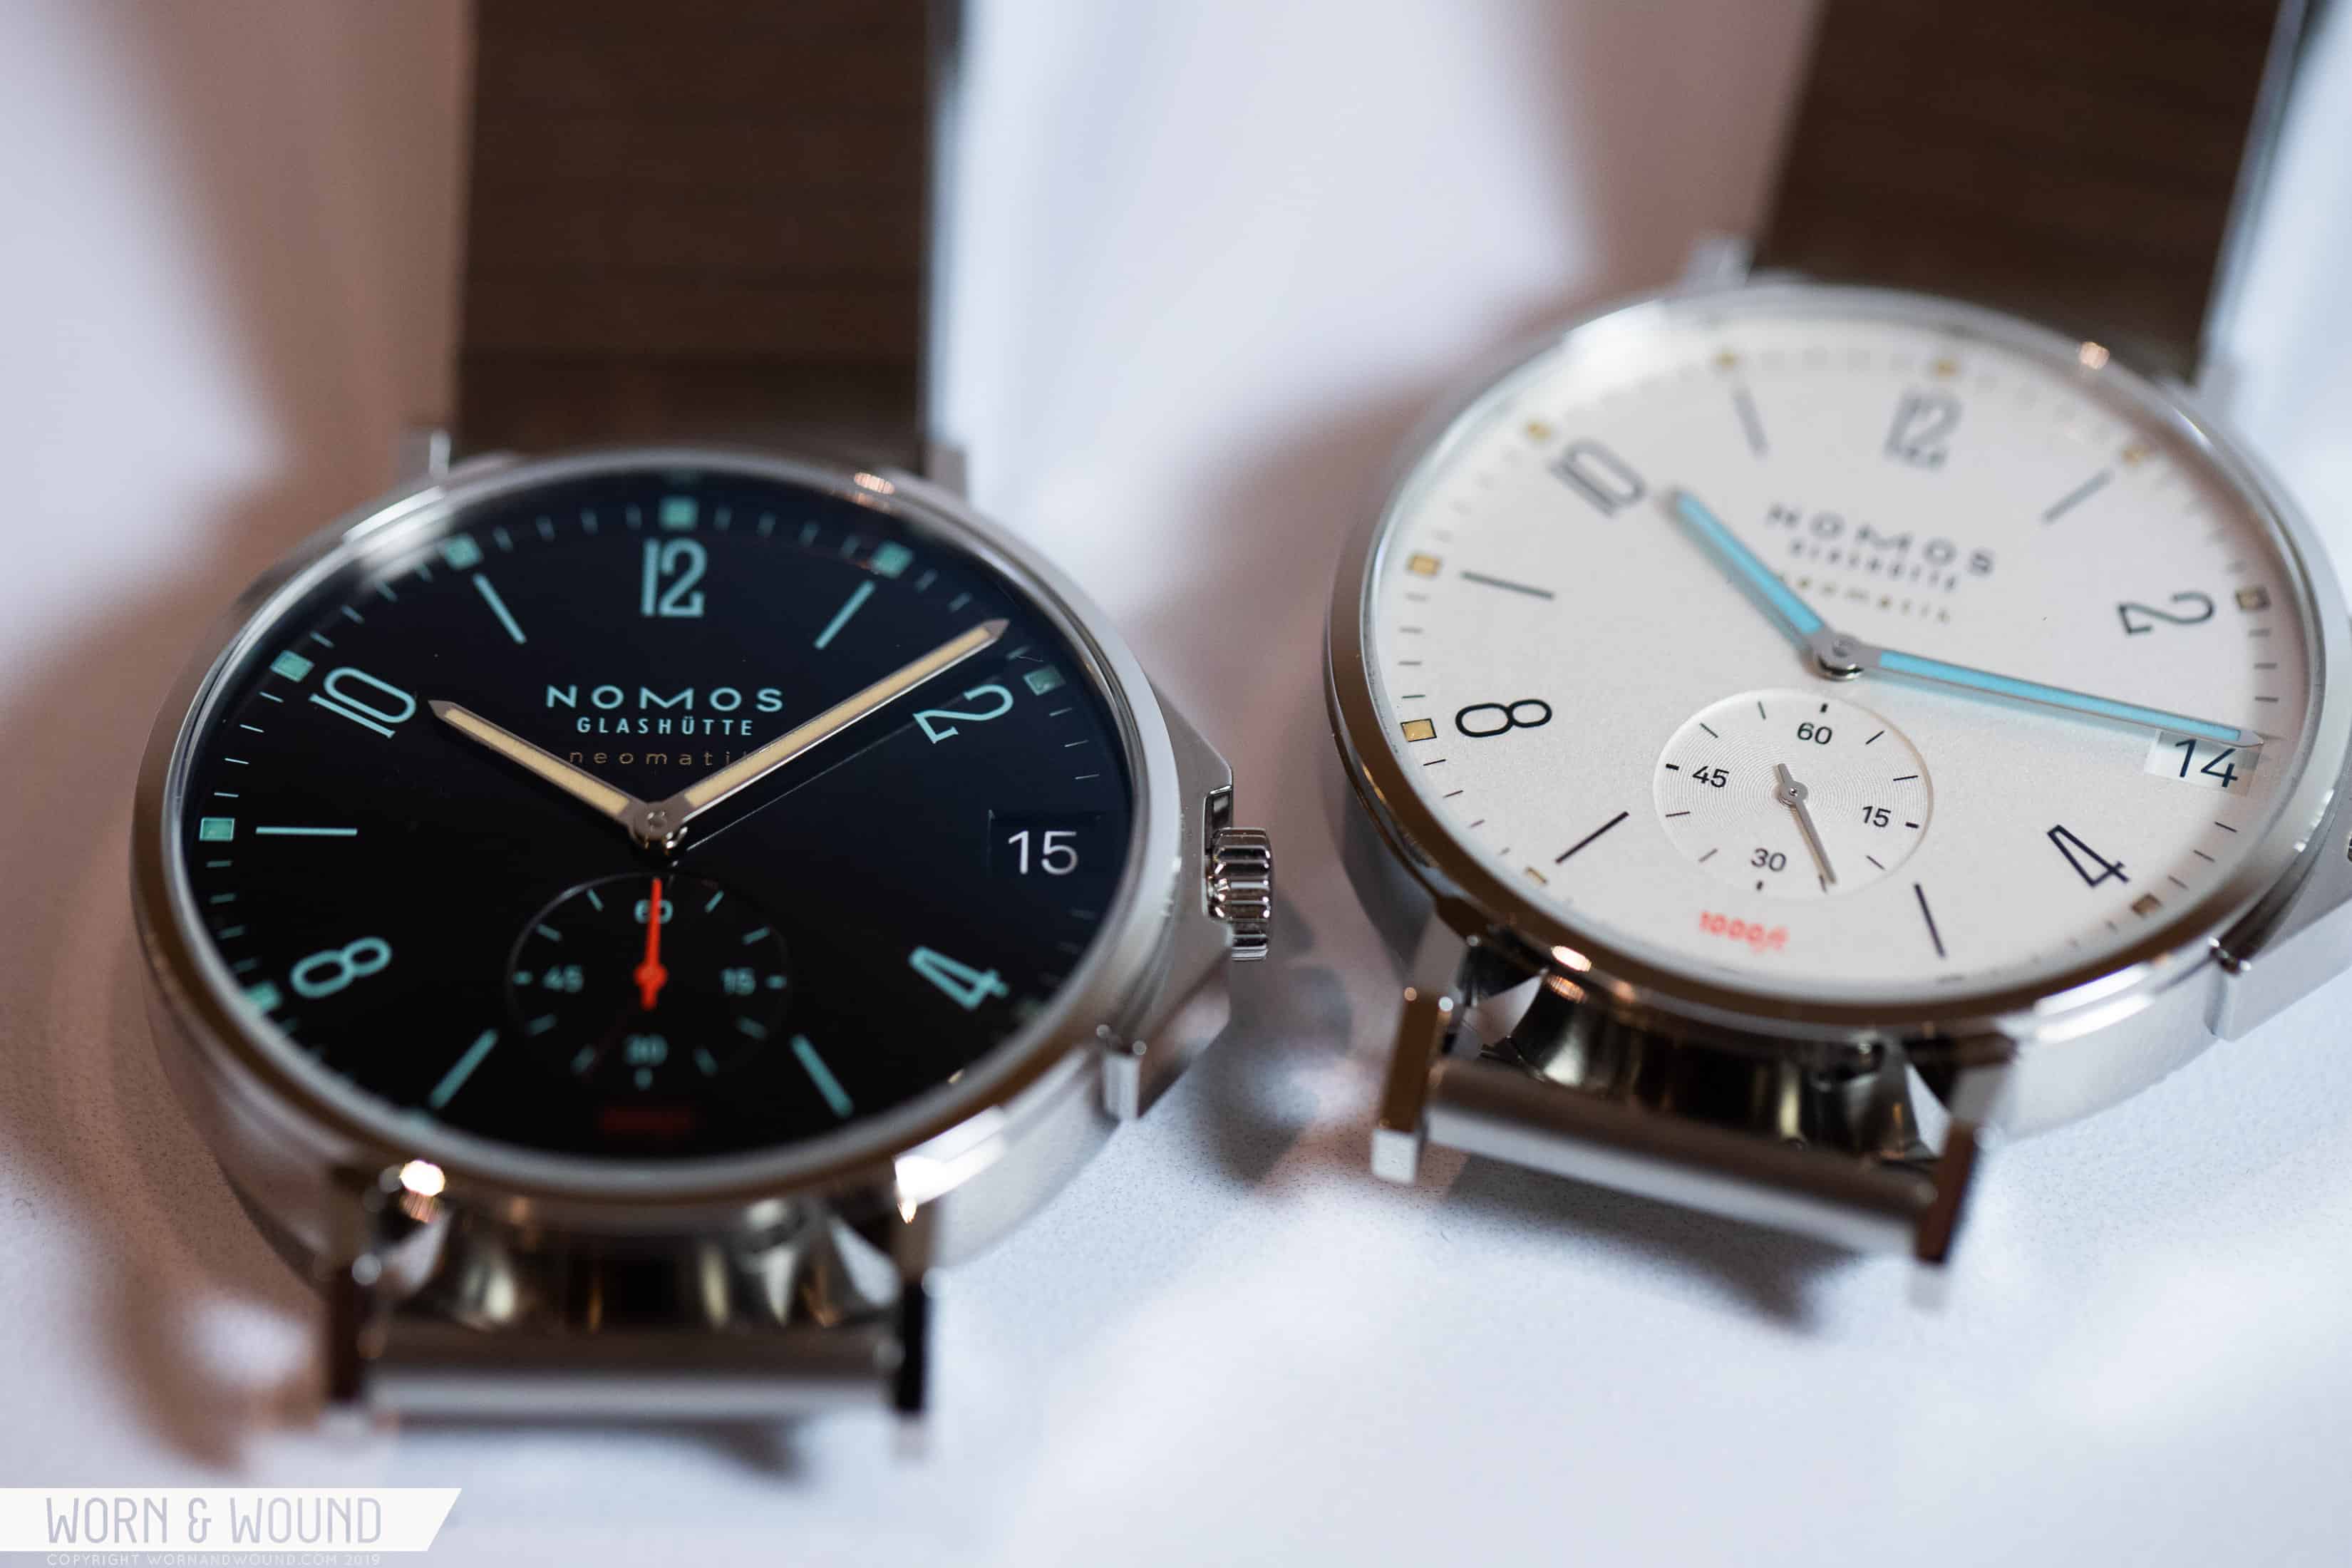 First Look at the Nomos Club and Tangente Sport neomatik 42 Date